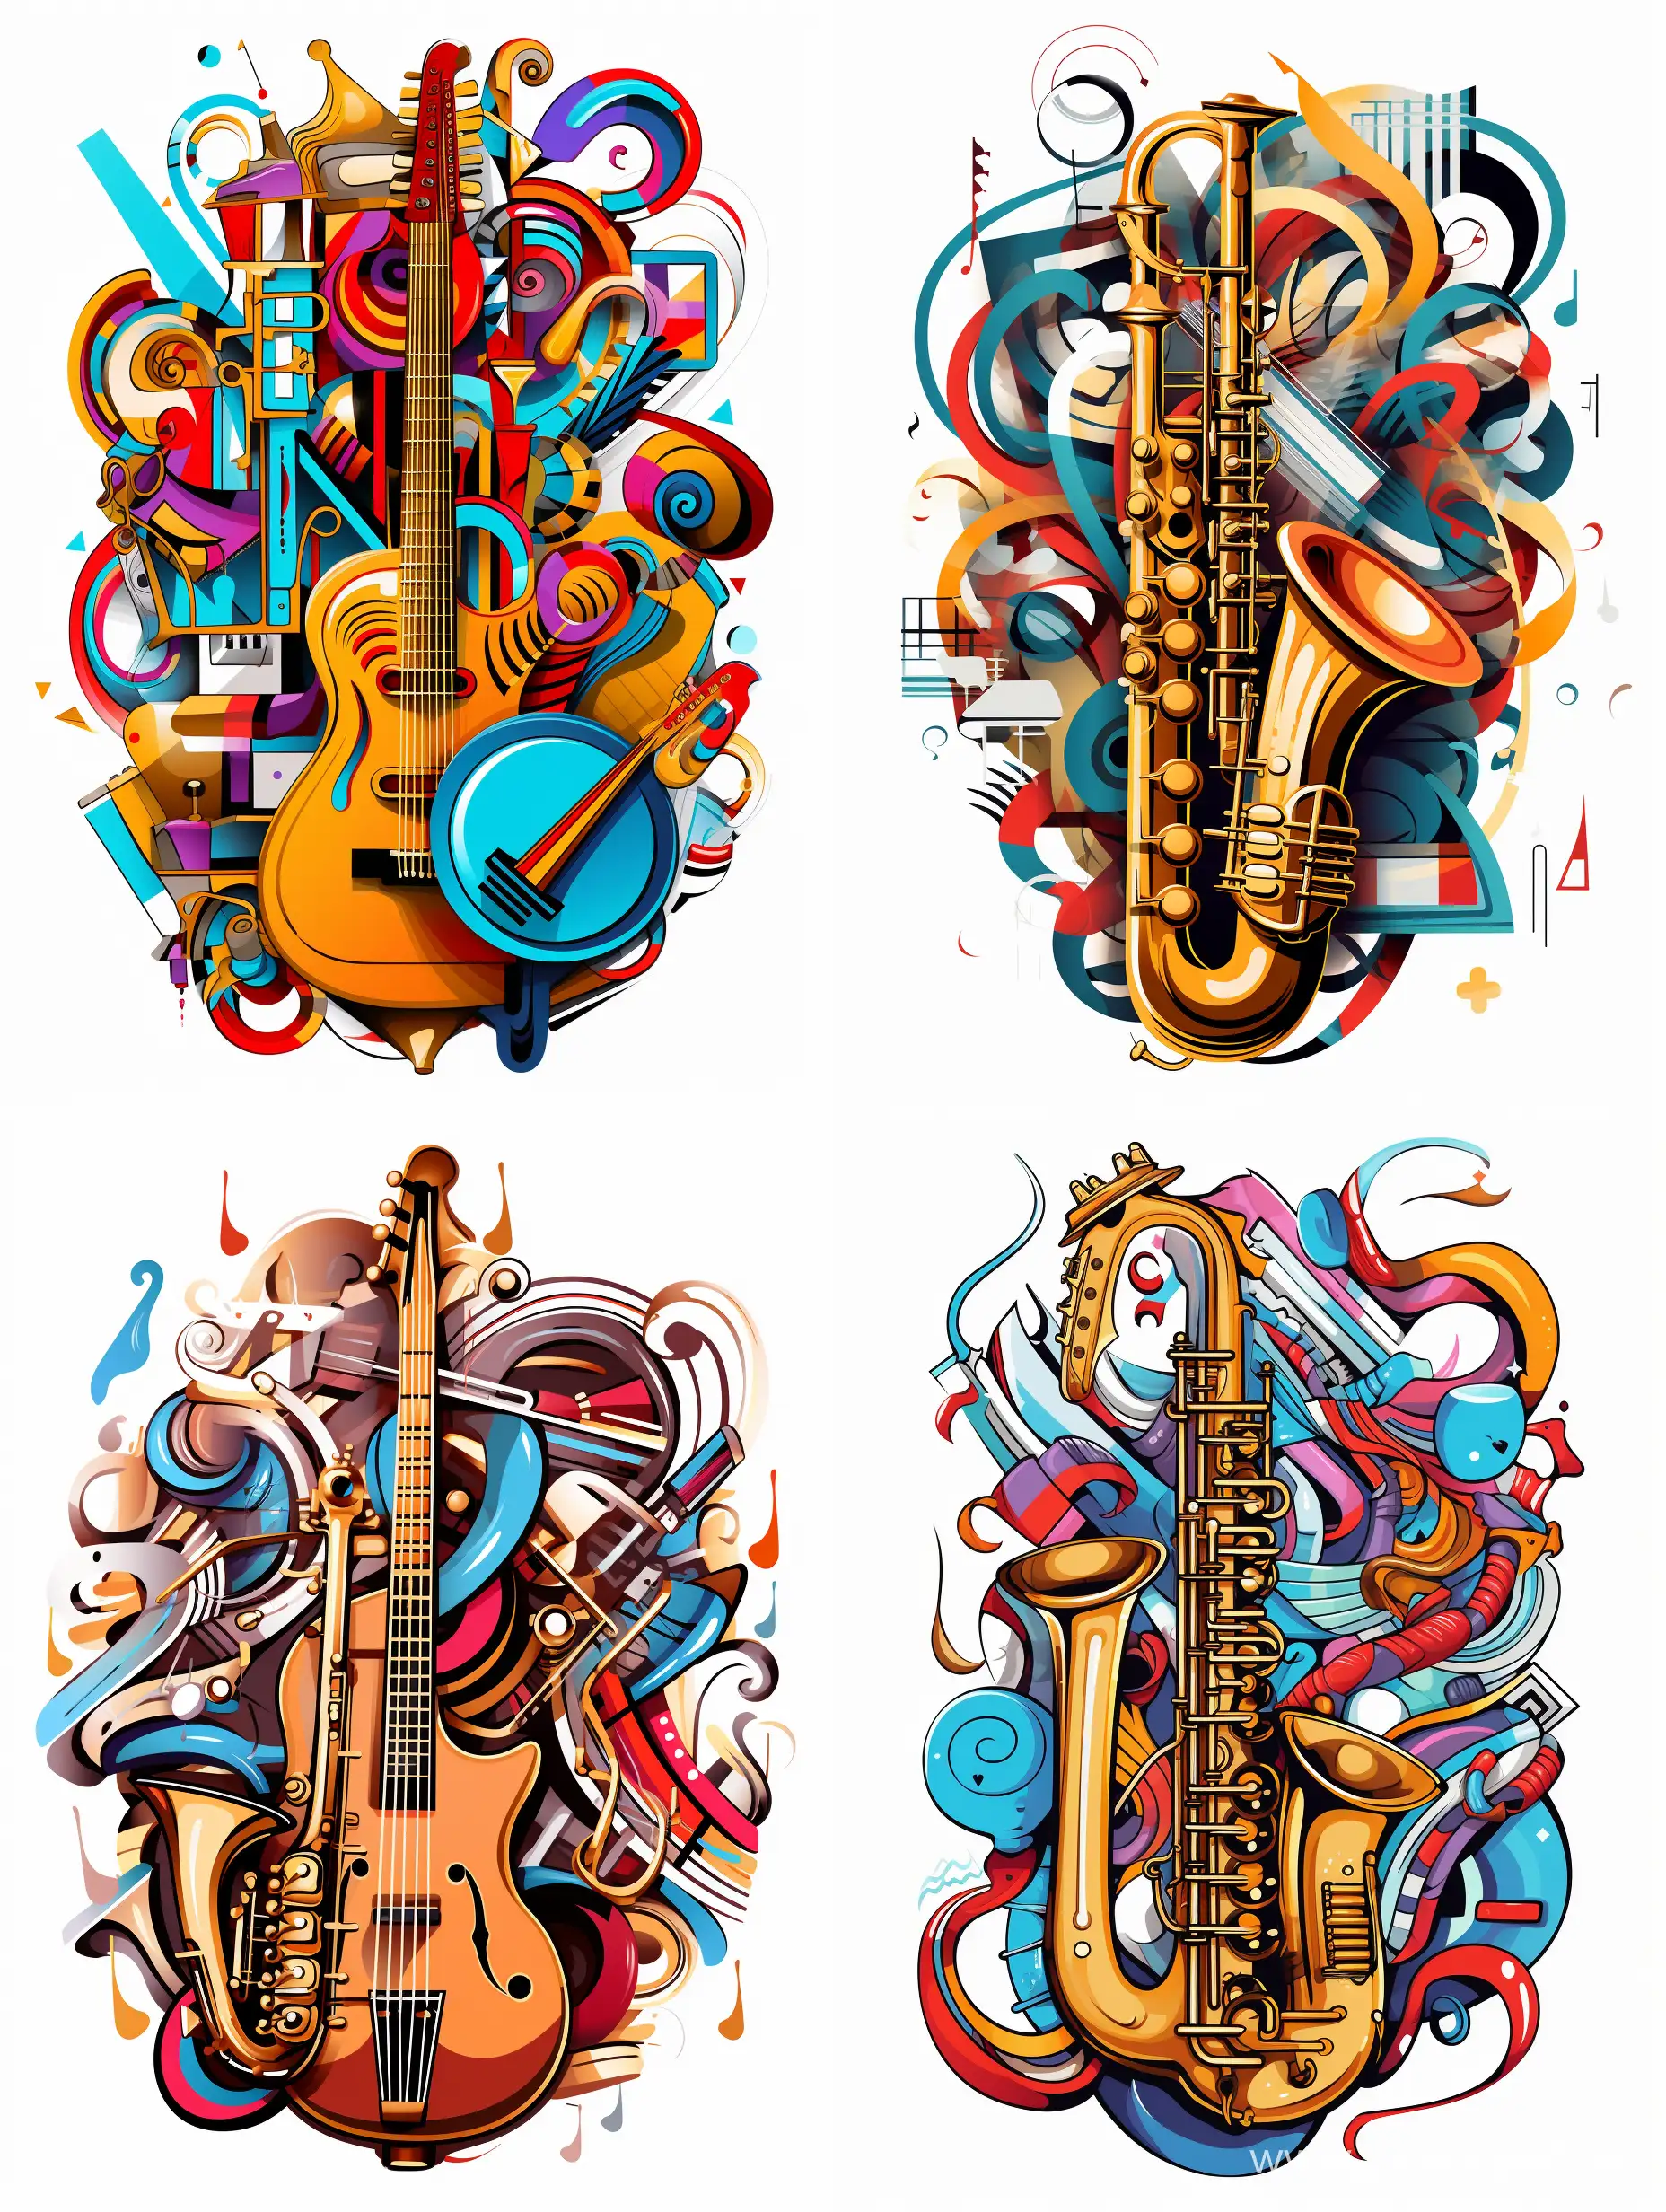 Narrow of saxophone, guitar, drum, heart-shaped, pop art style, complex colors, on a white background